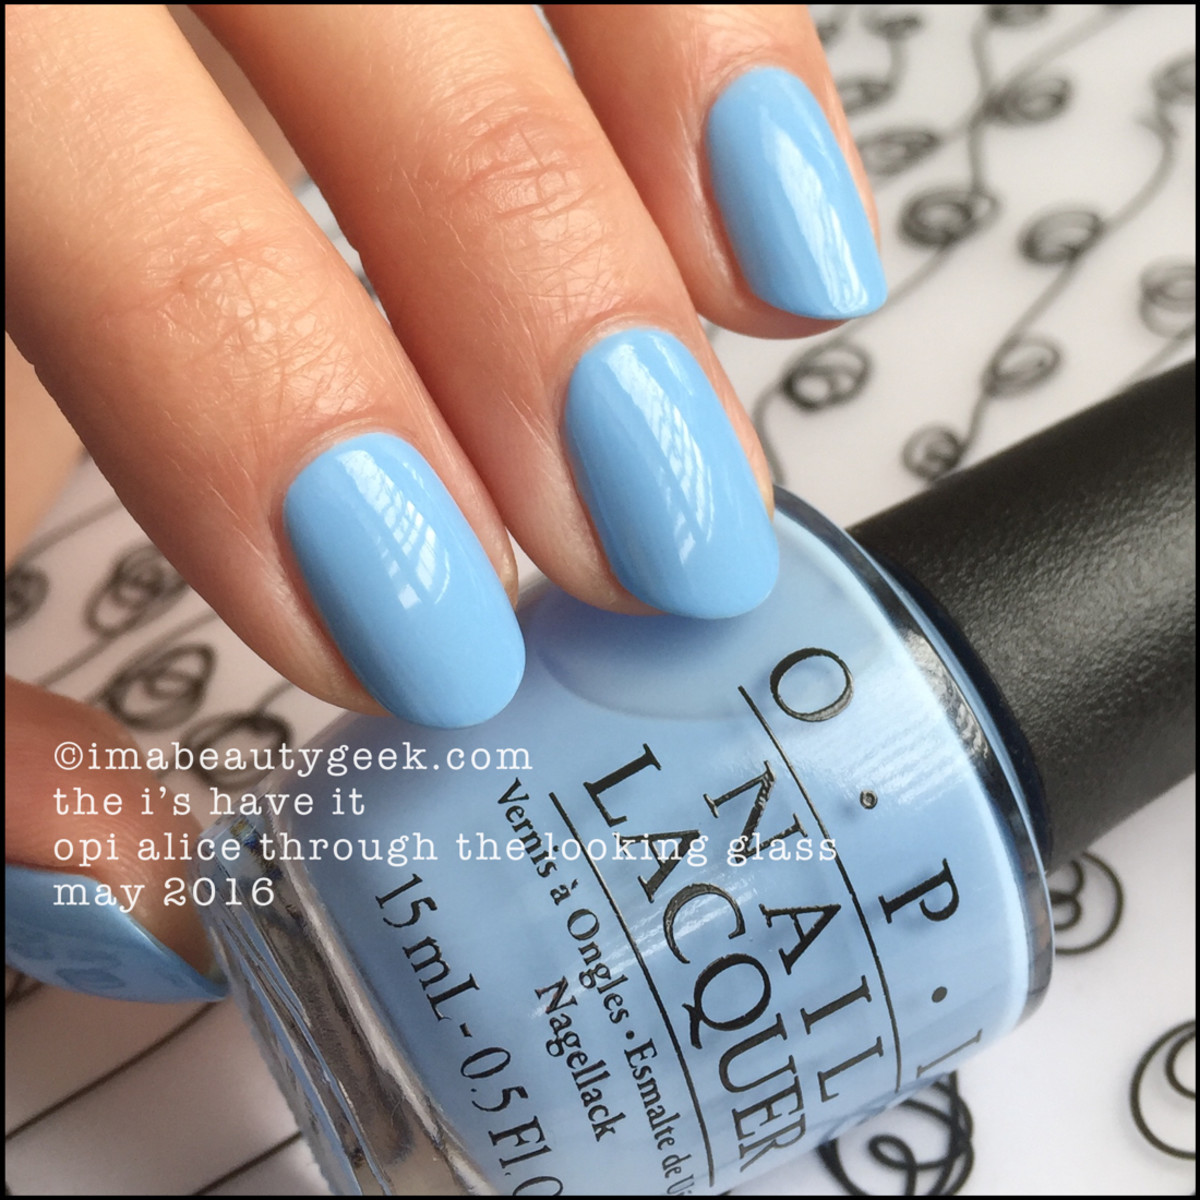 OPI The I's Have It_OPI Alice Through the Looking Glass Swatches Review 2016